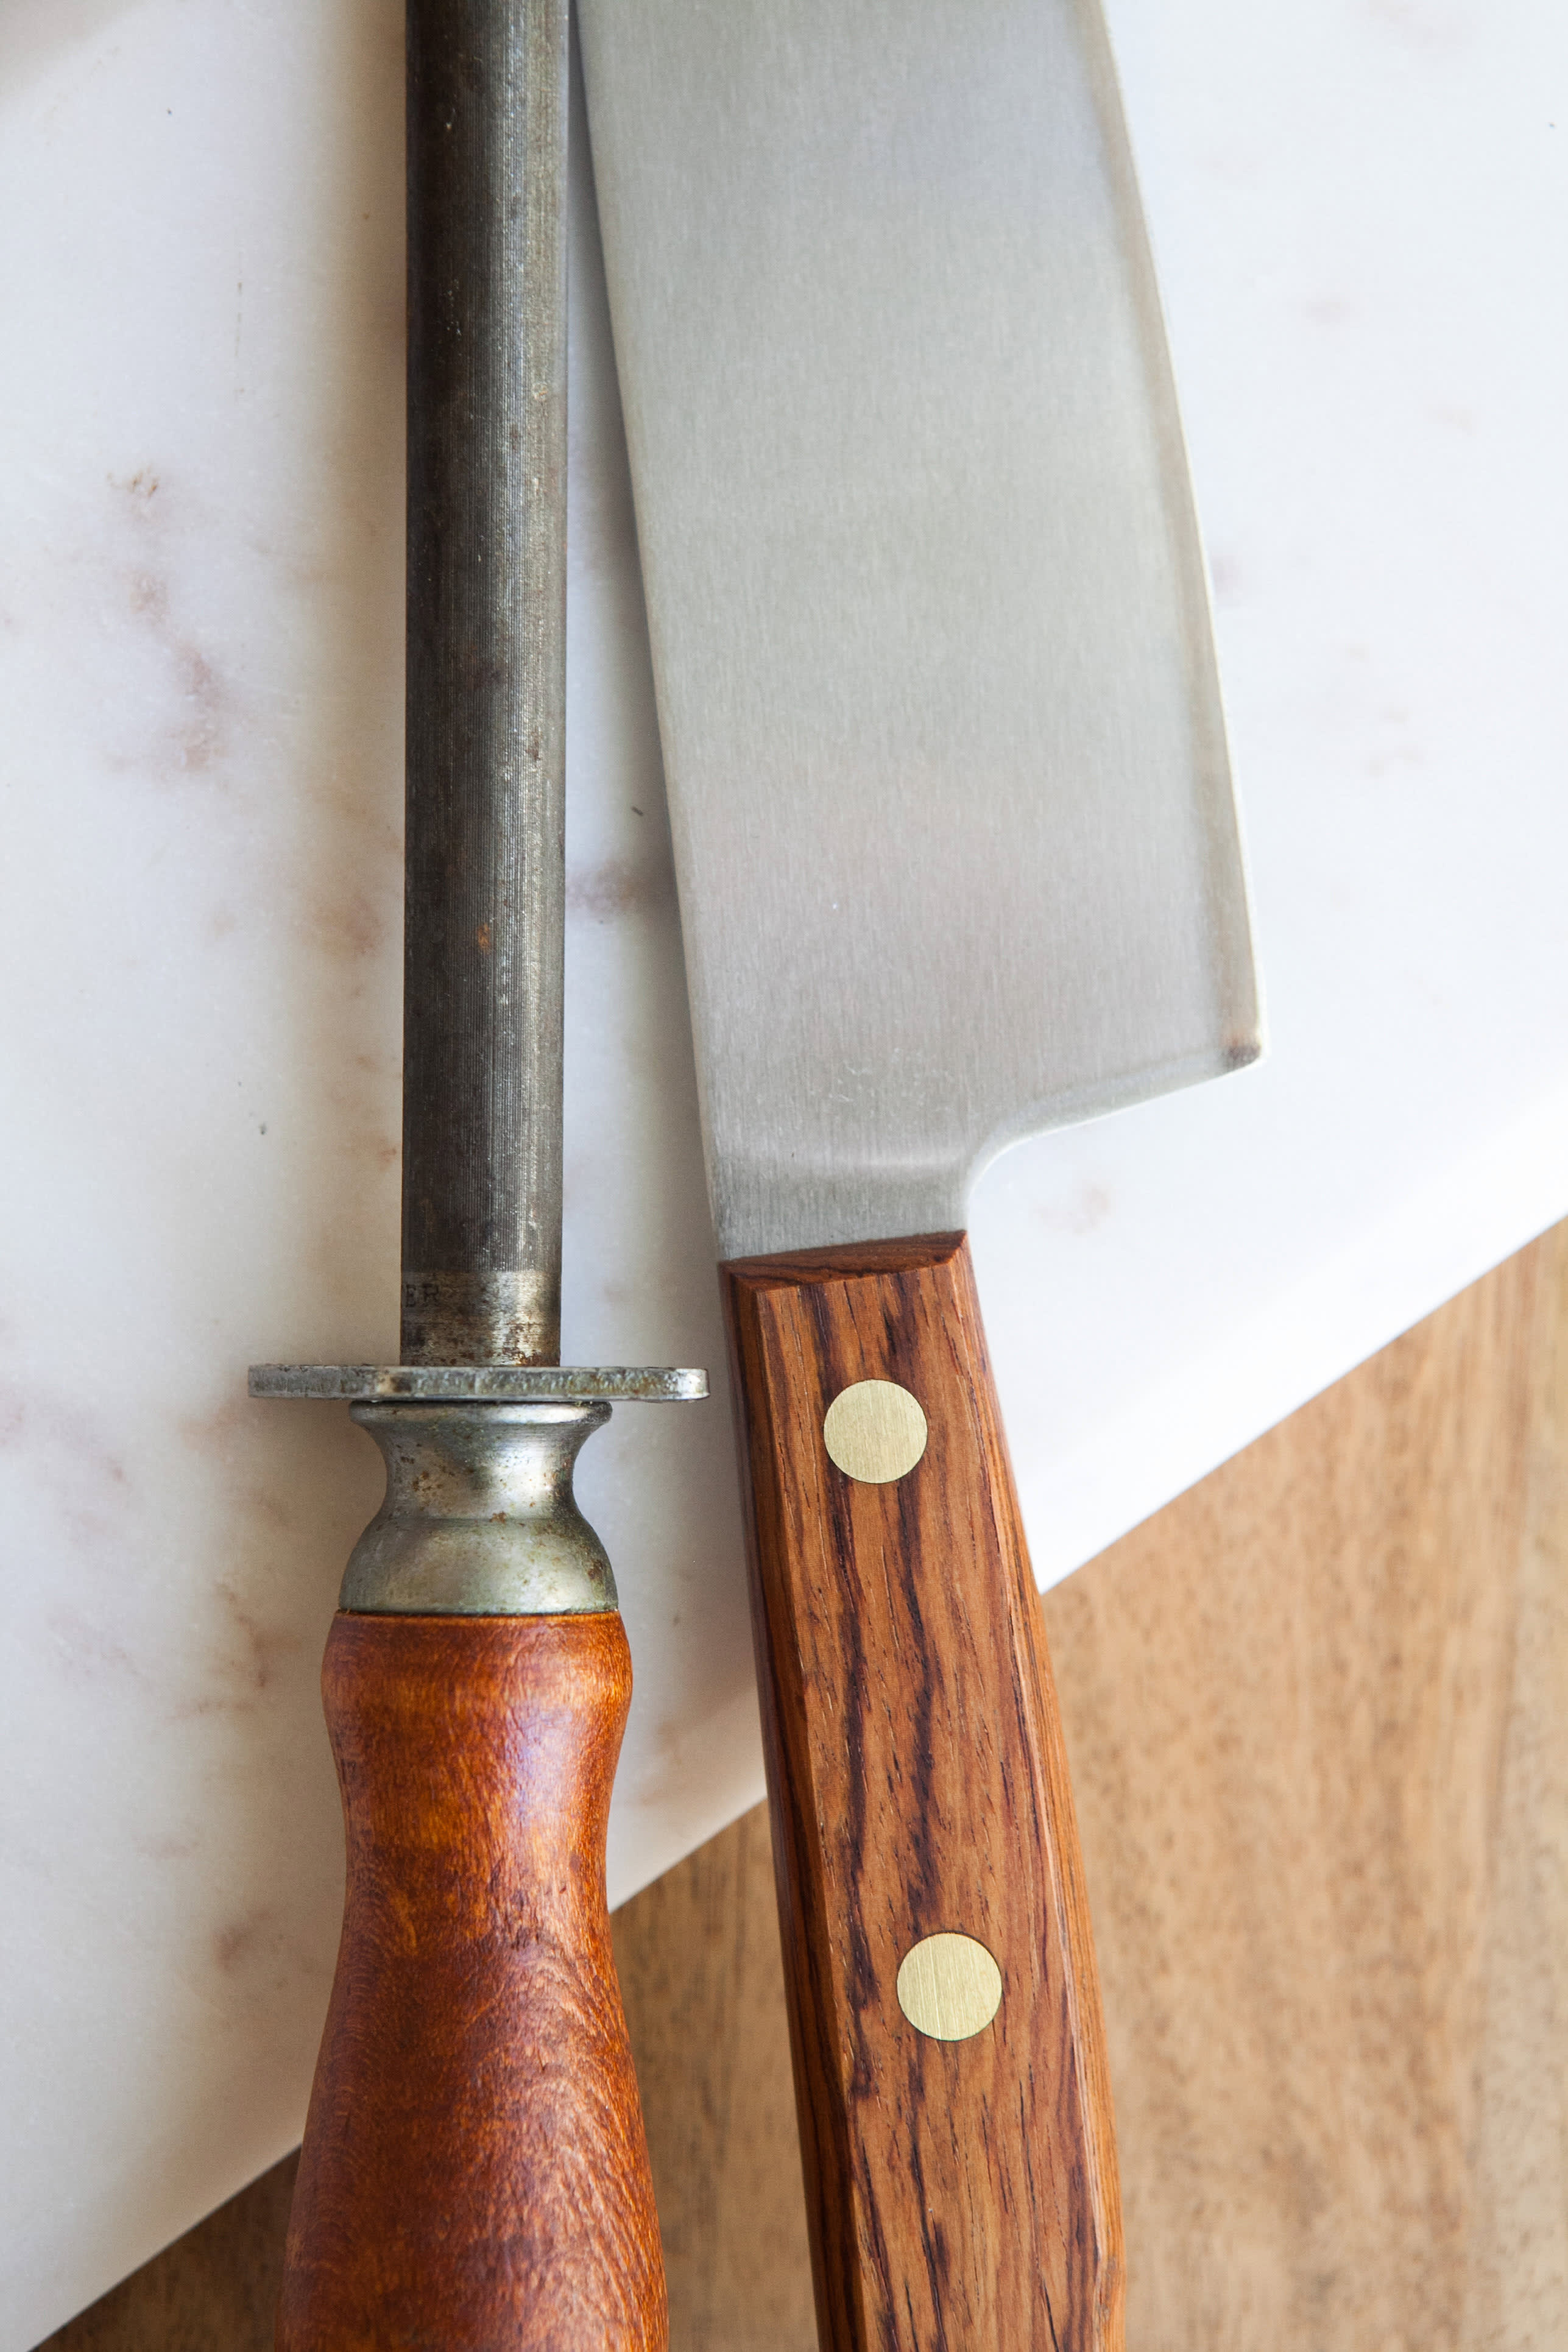 What you need to know about taking care of a carbon steel knife